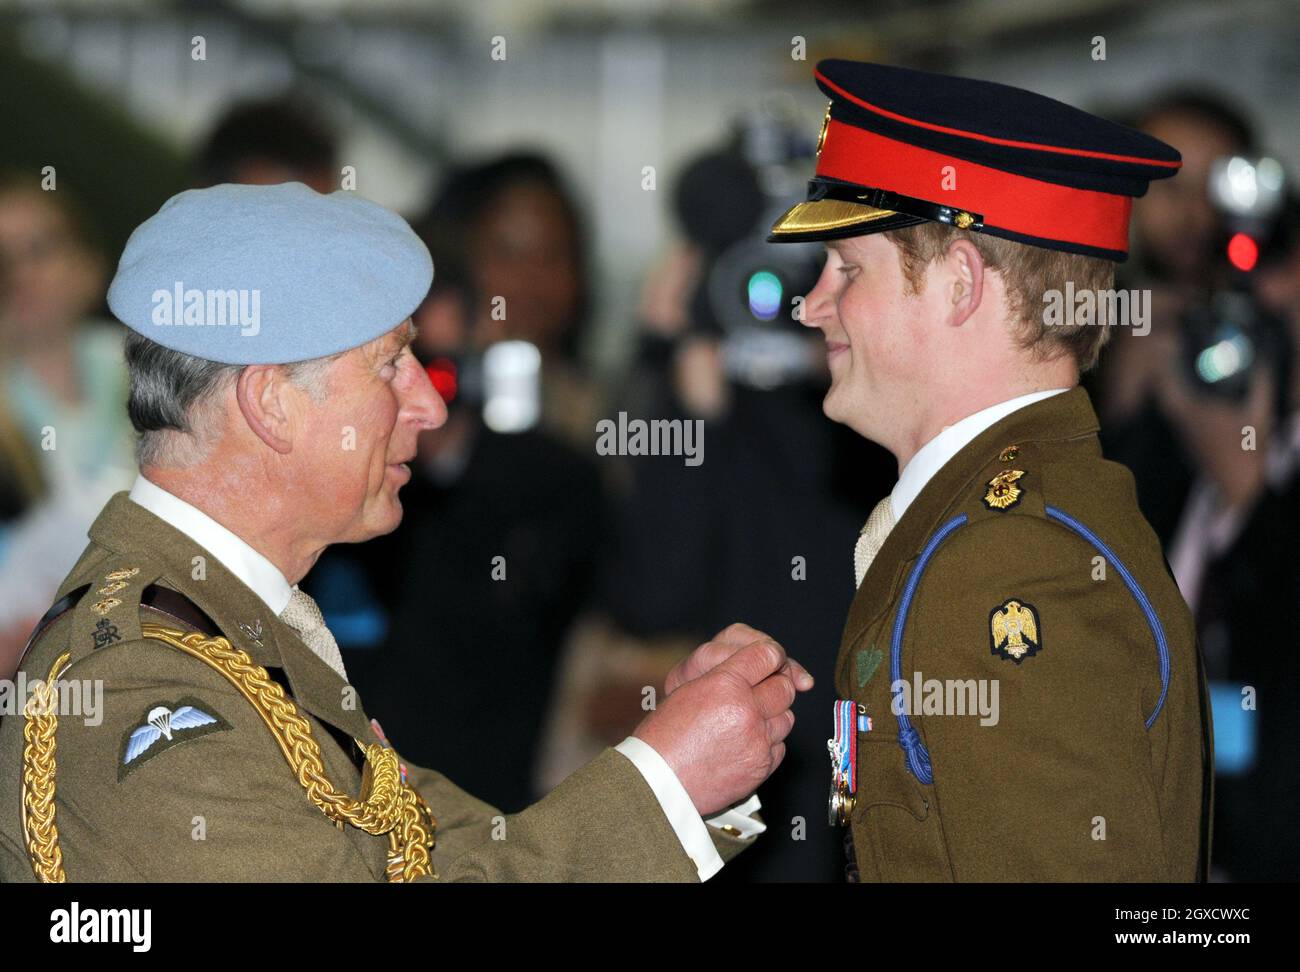 Prince Charles, Prince of Wales presents Prince Harry with his flying wings at Prince Harry's pilot course graduation at the Army Aviation Centre on May 7, 2010. The Prince will learn to fly Apache helicopters during the next part of his training.  Stock Photo